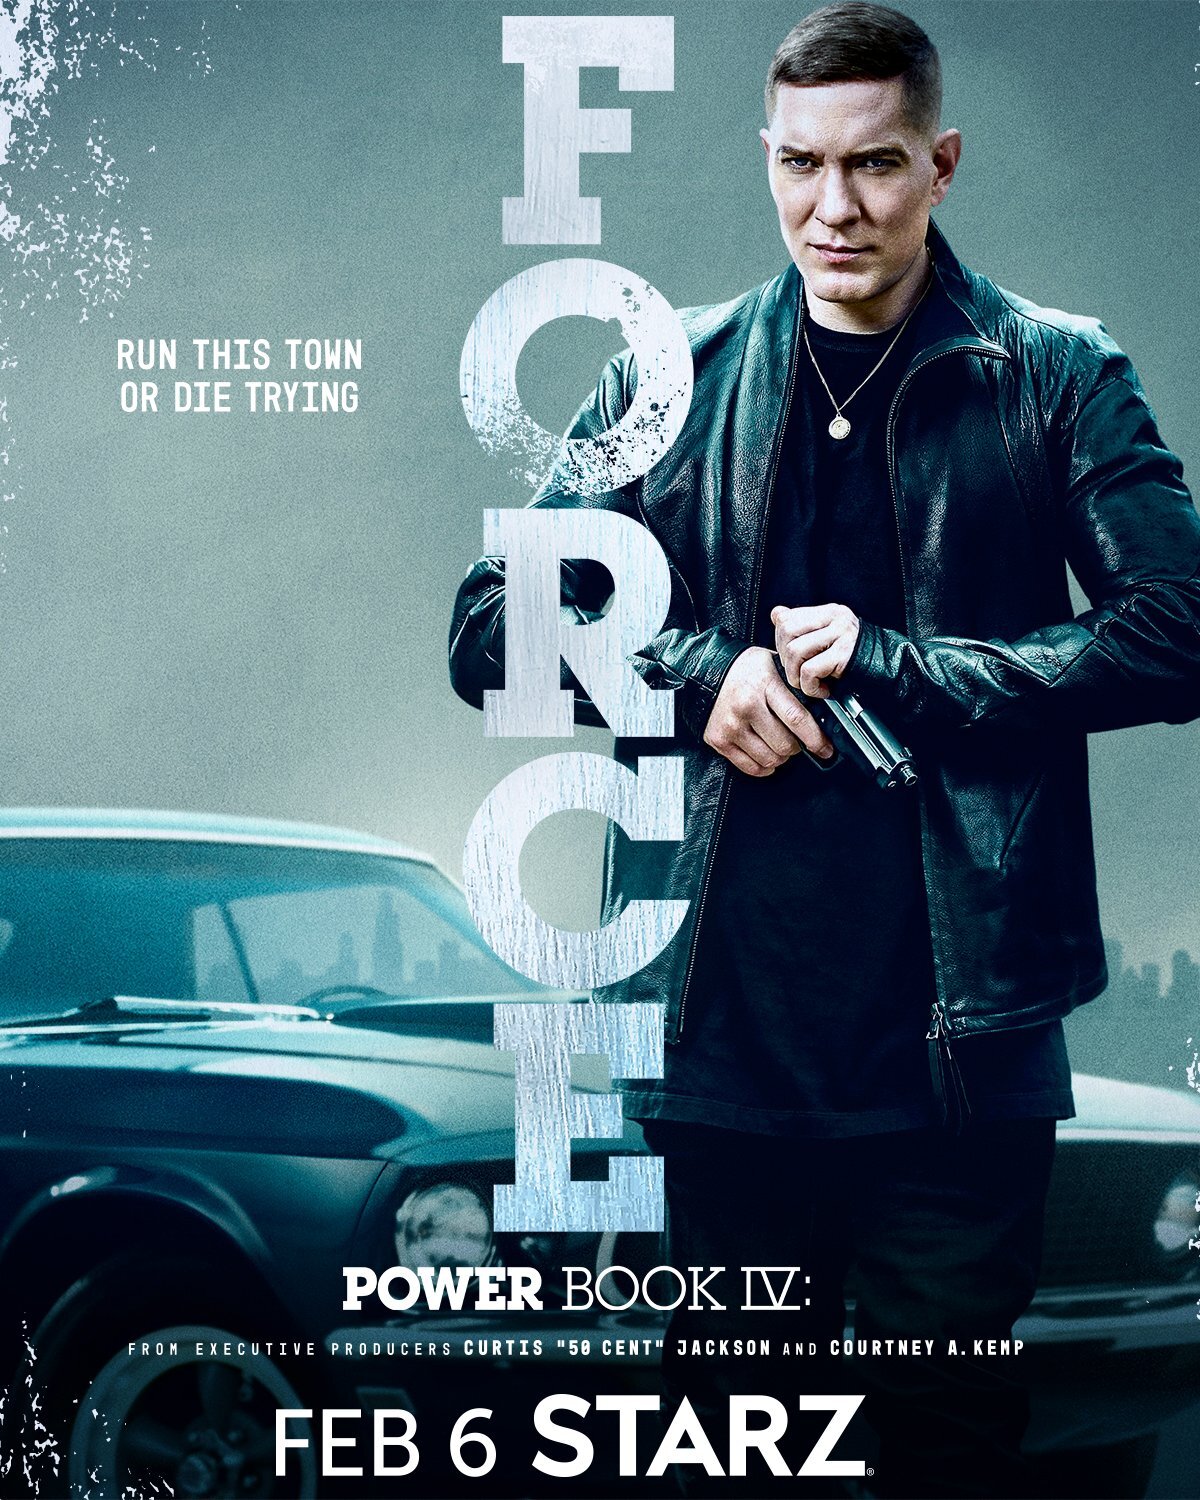 2 New Clips From Starz Original Series 'Power Book IV: Force'